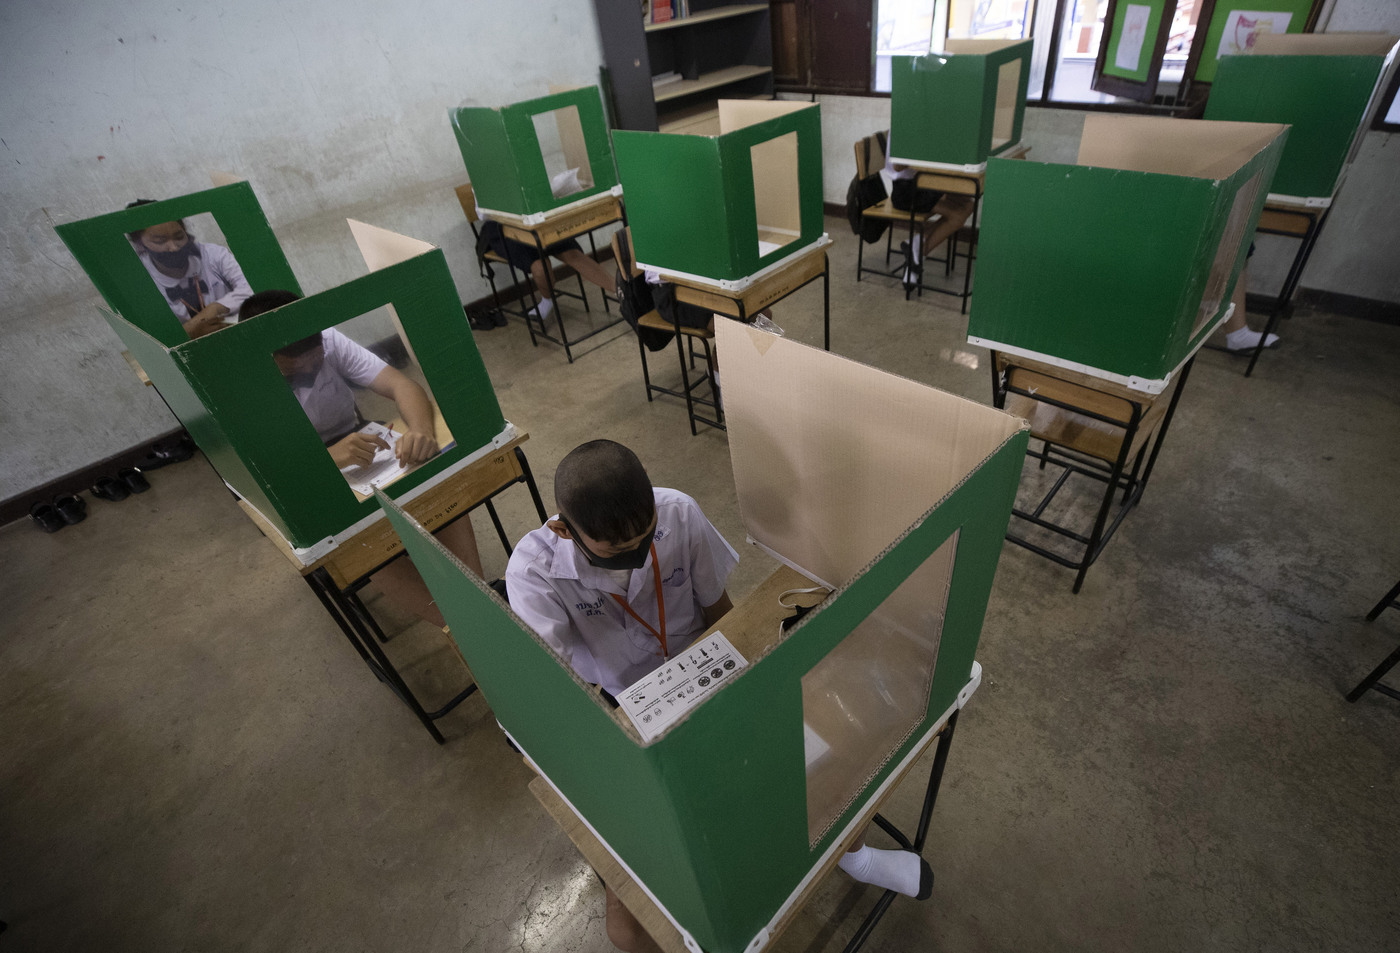 Students in a protective gear are seated at partitioned desks at the Samkhok School in Pathum Thani, outside Bangkok, Wednesday, July 1, 2020. Thailand has begun a fifth phase of relaxations of COVID-19 restrictions, allowing the reopening of schools and high-risk entertainment venues such as pubs and massage parlors that had been shut since mid-March. (AP Photo/Sakchai Lalit)